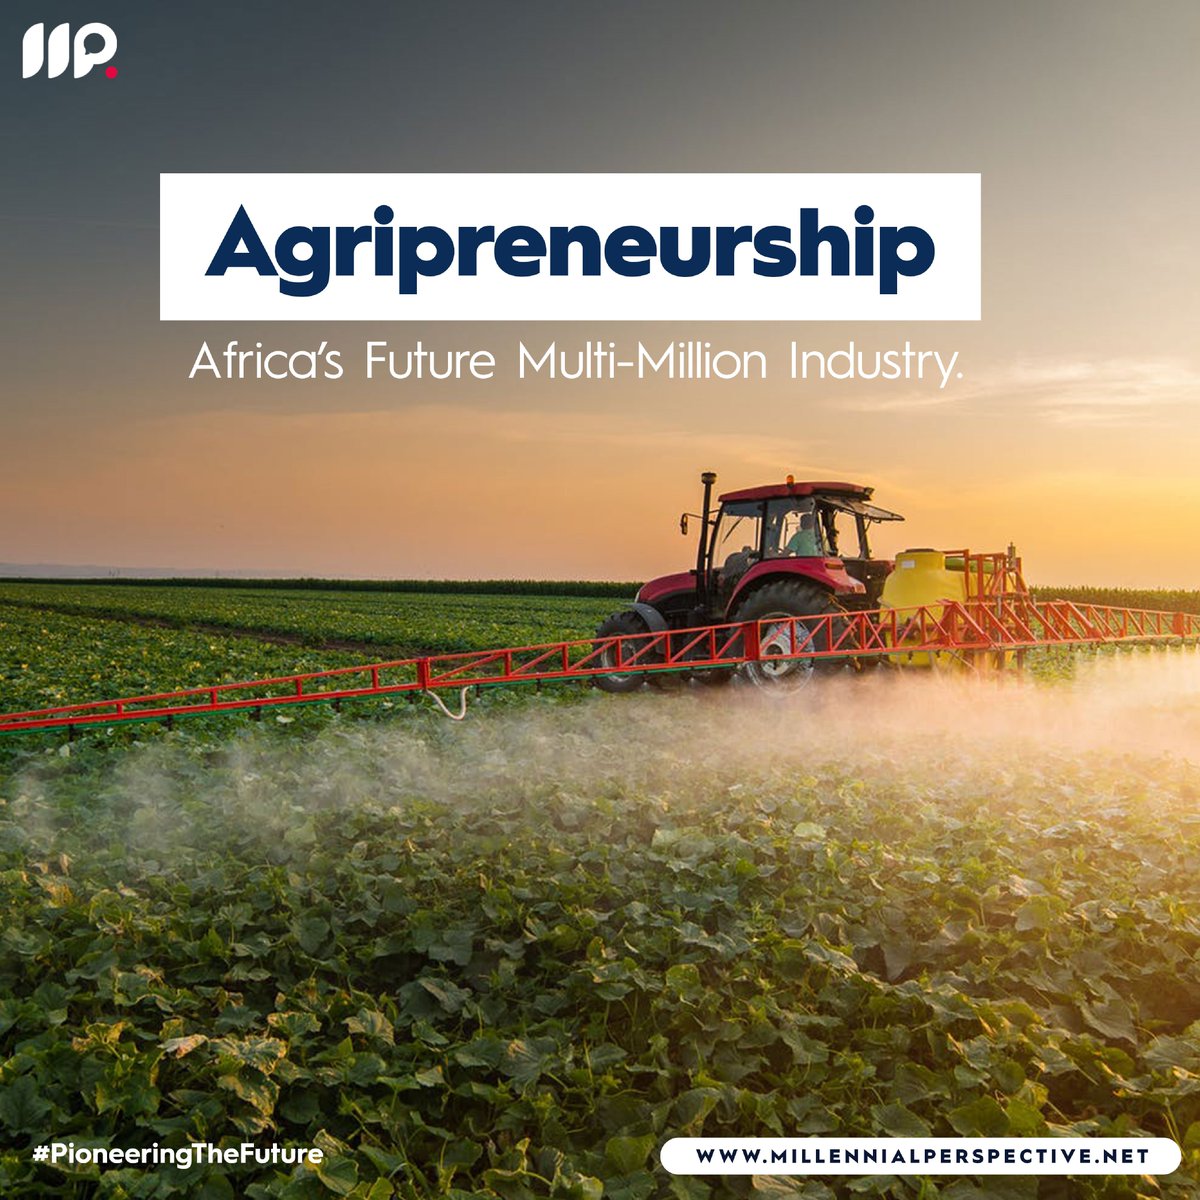 NEW PERSPECTIVE by Chimfwembe Ngaba

Agripreneurship; Africa's Future Multi-Million Industry

Read it here millennialperspective.net/agriprenuershi… 

#Agriculture #PioneeringTheFuture